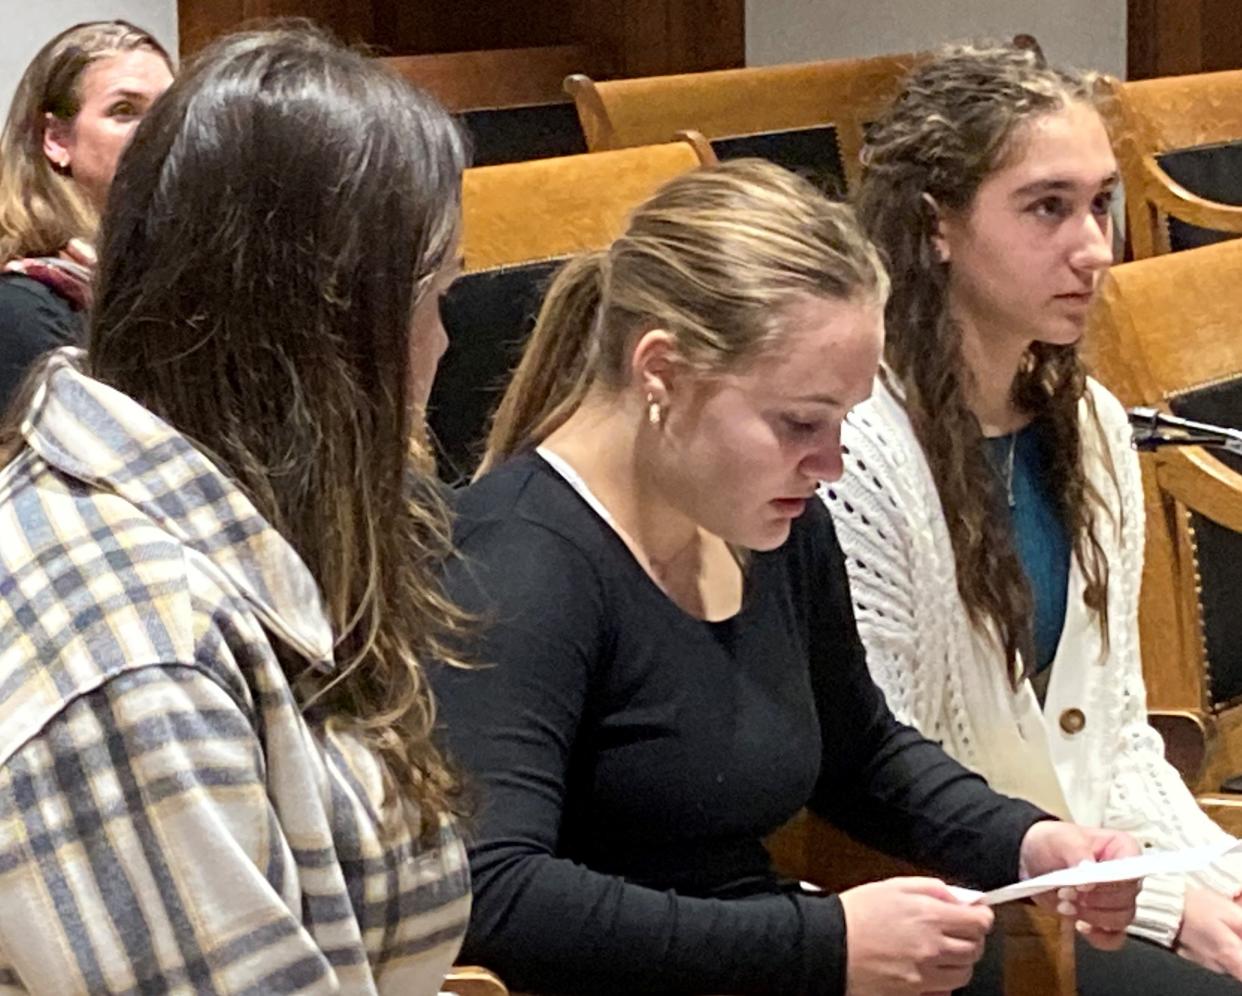 Teenagers from Norwood, from left, Delilah Sayers,17, Addie Cataldo, 16, and Haido Bratsis, 17, testify before the Joint Committee on State Administration and Regulatory Oversight in support of an official ice cream flavor for Massachusetts: Cookies and cream.